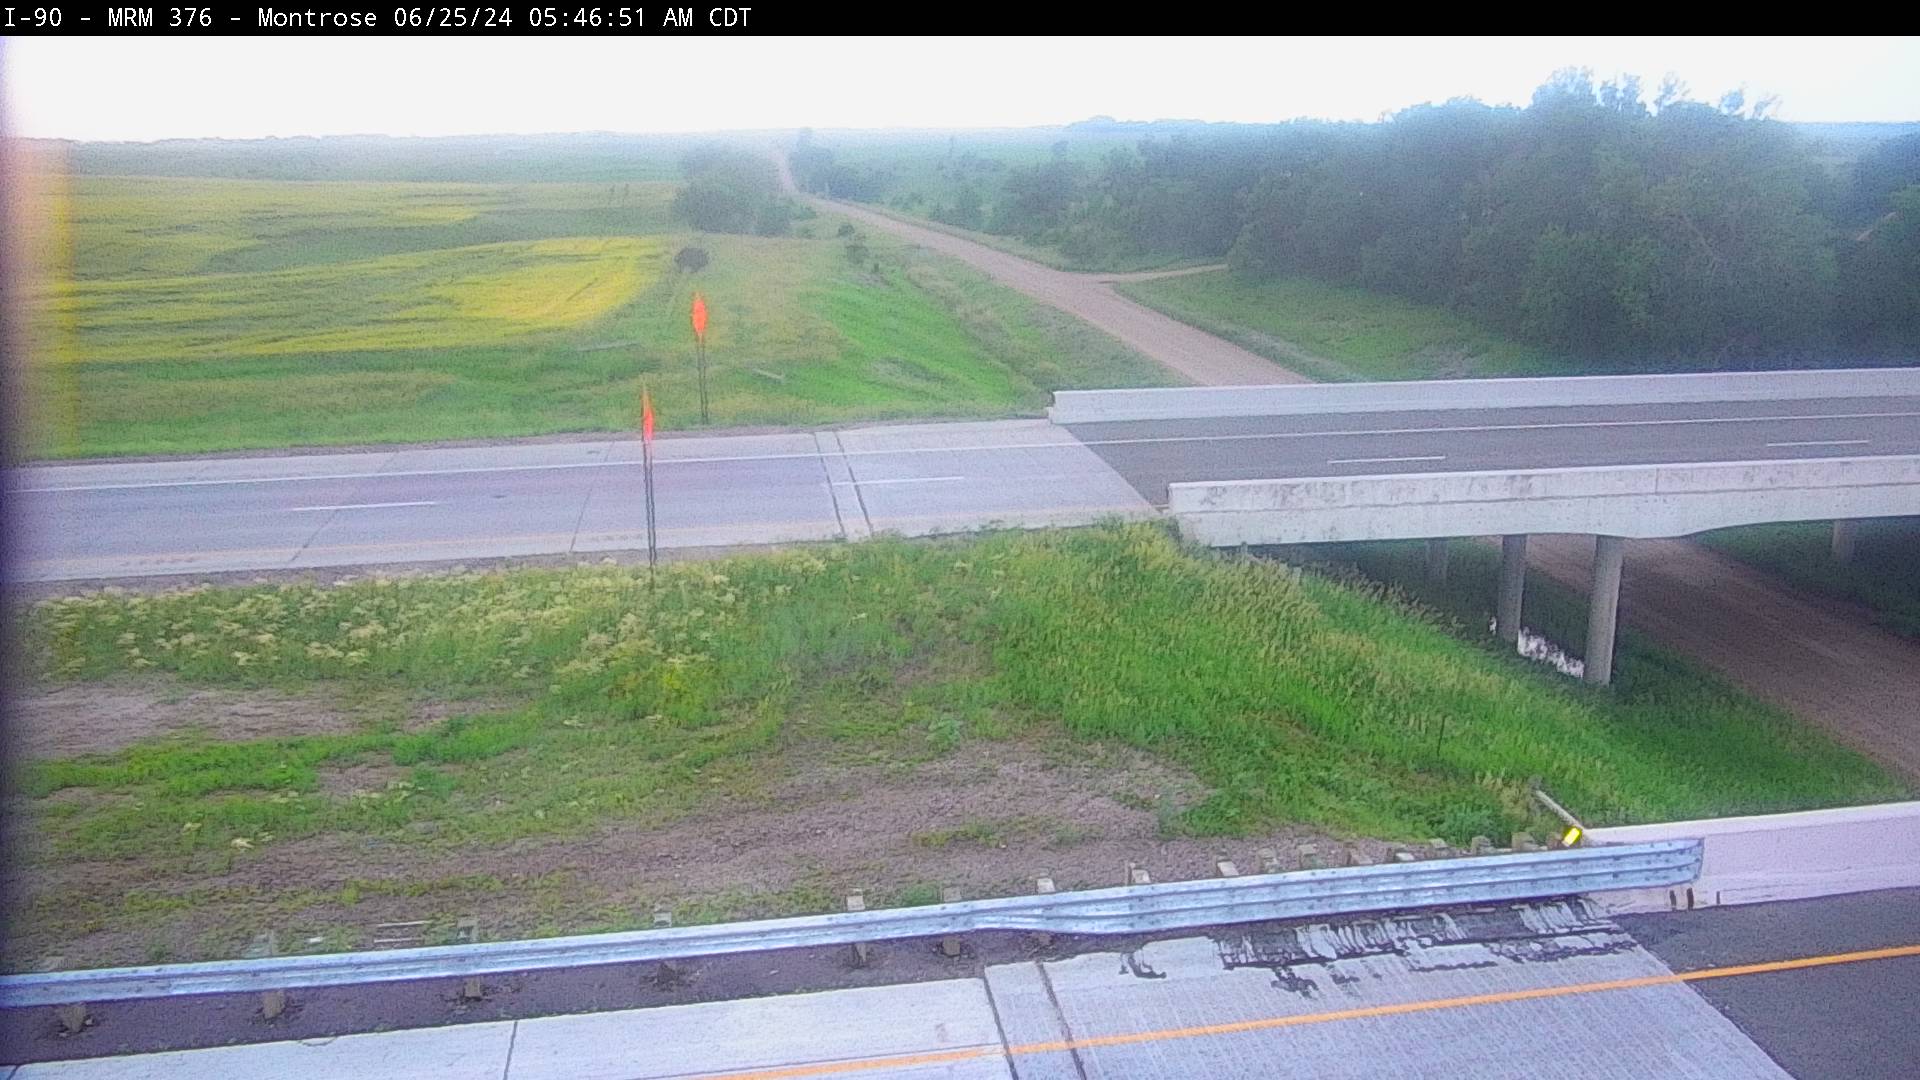 Traffic Cam 3 miles west of Humboldt along I-90 @ MP 376.0 - South Player